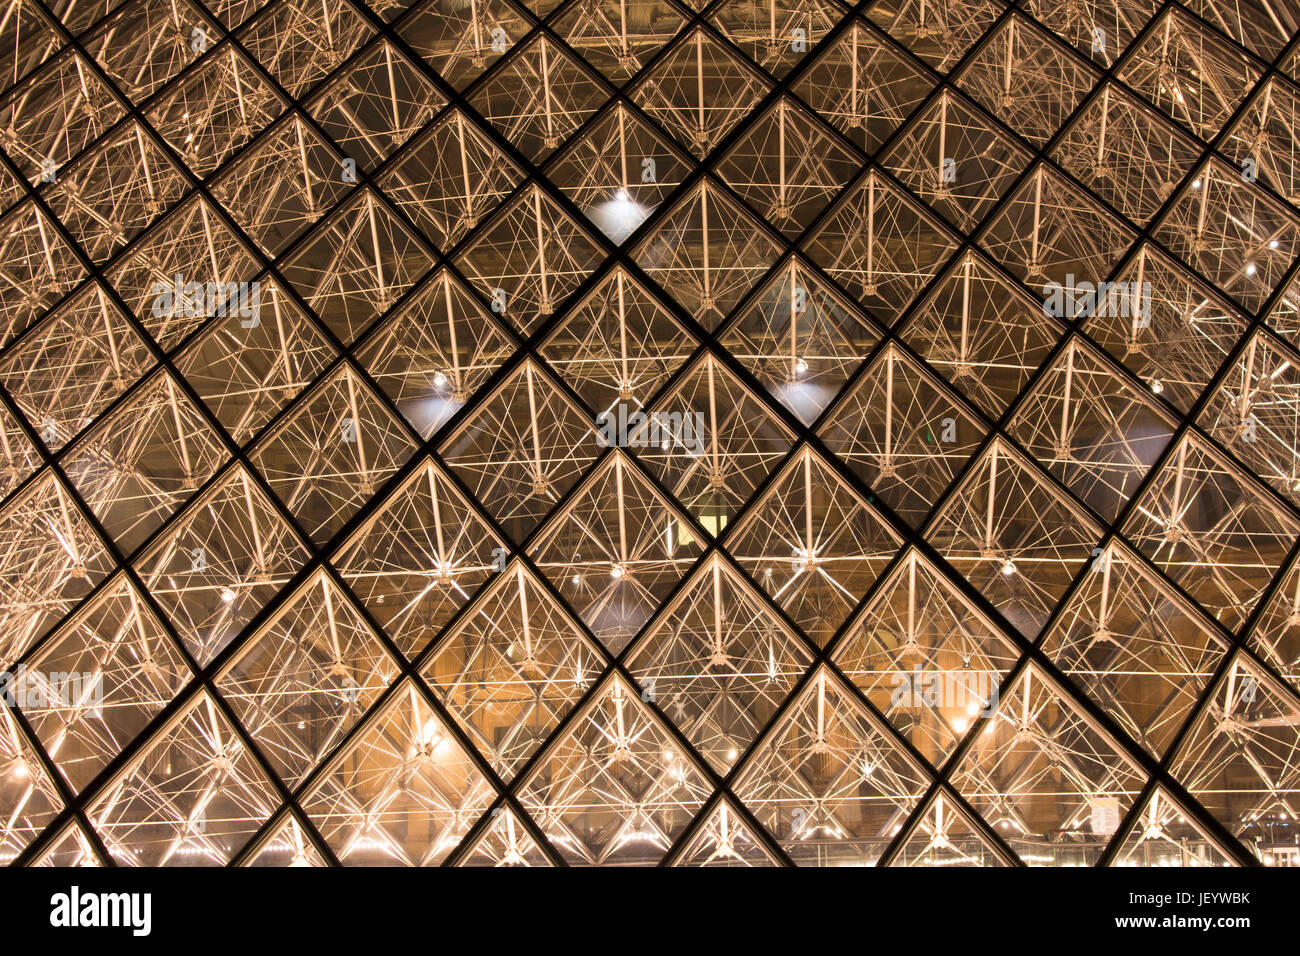 Close up view of glass pyramid at Louvre Museum (Musée du Louvre). Former historic palace housing huge art collection, from Roman sculptures to da Vin Stock Photo